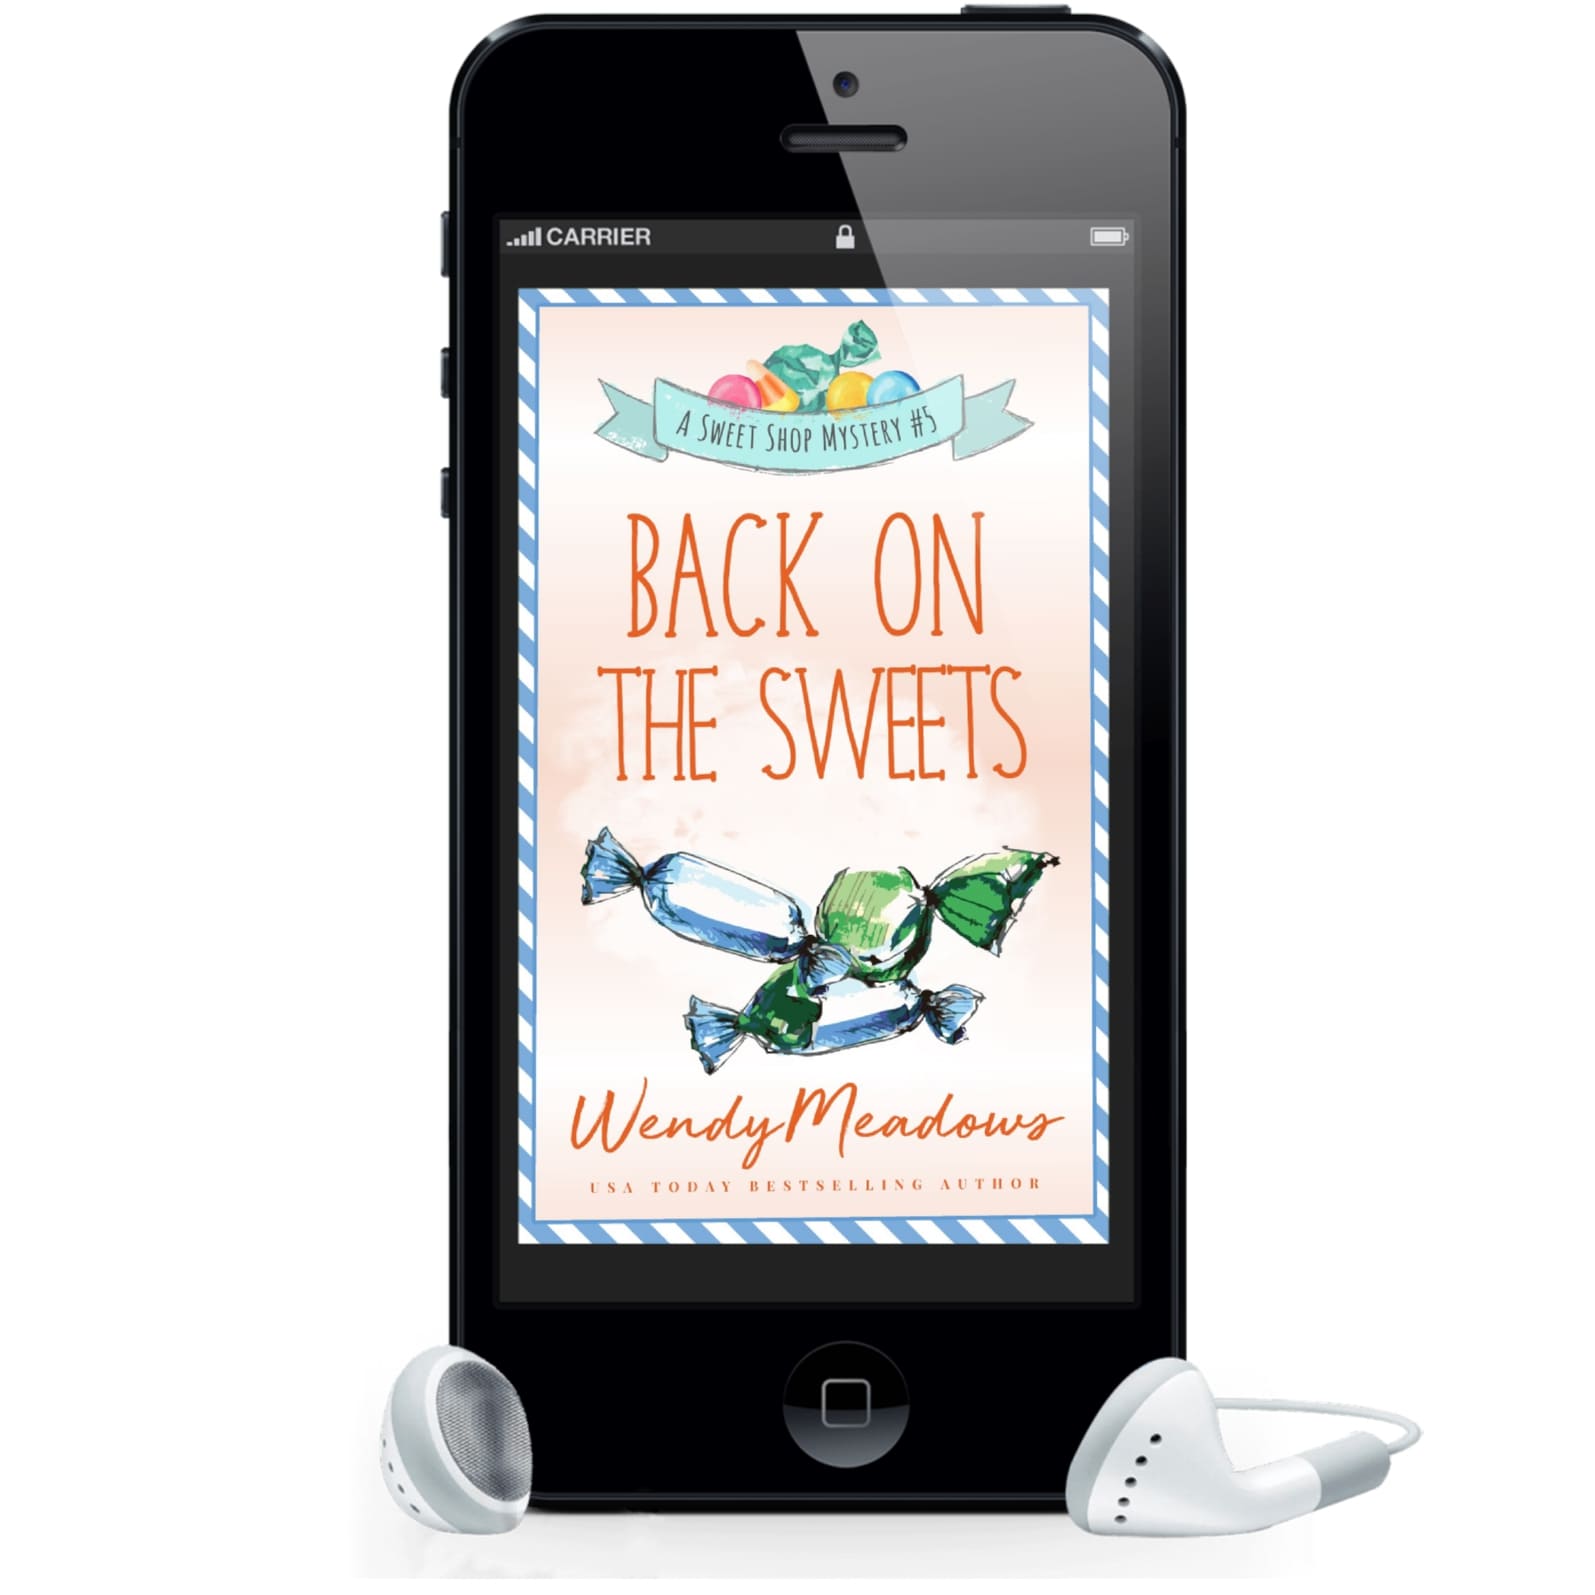 Wendy Meadows Cozy Mystery Audiobook Back on the Sweets (AUDIOBOOK)